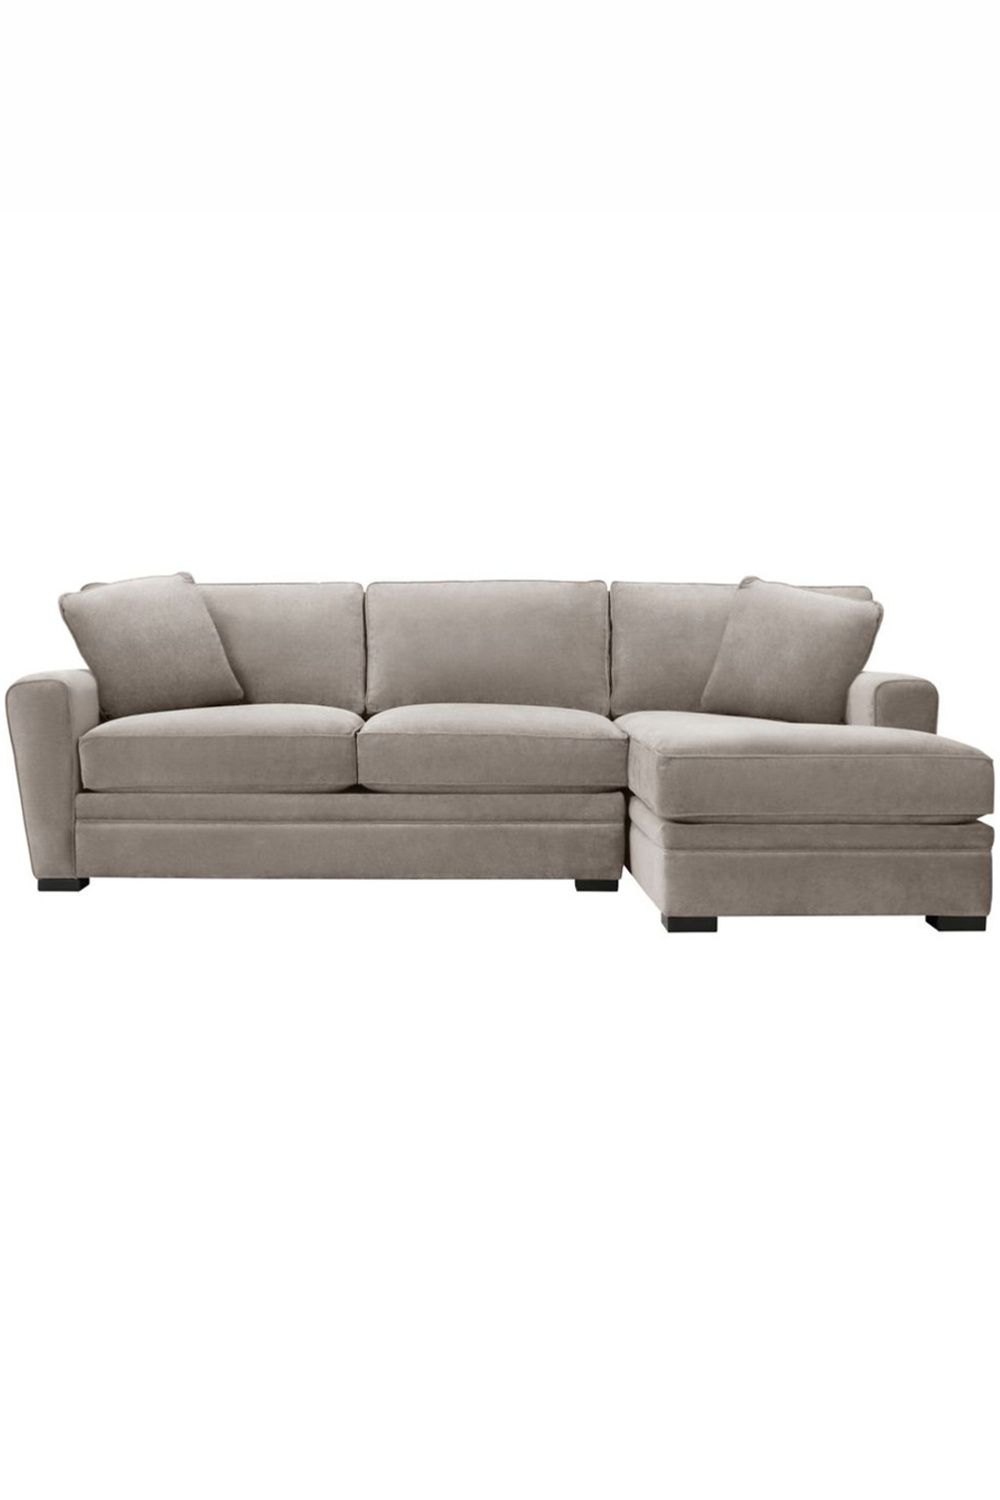 The Ultimate Guide to Choosing a
Microfiber Sectional Sofa for Your Living Room